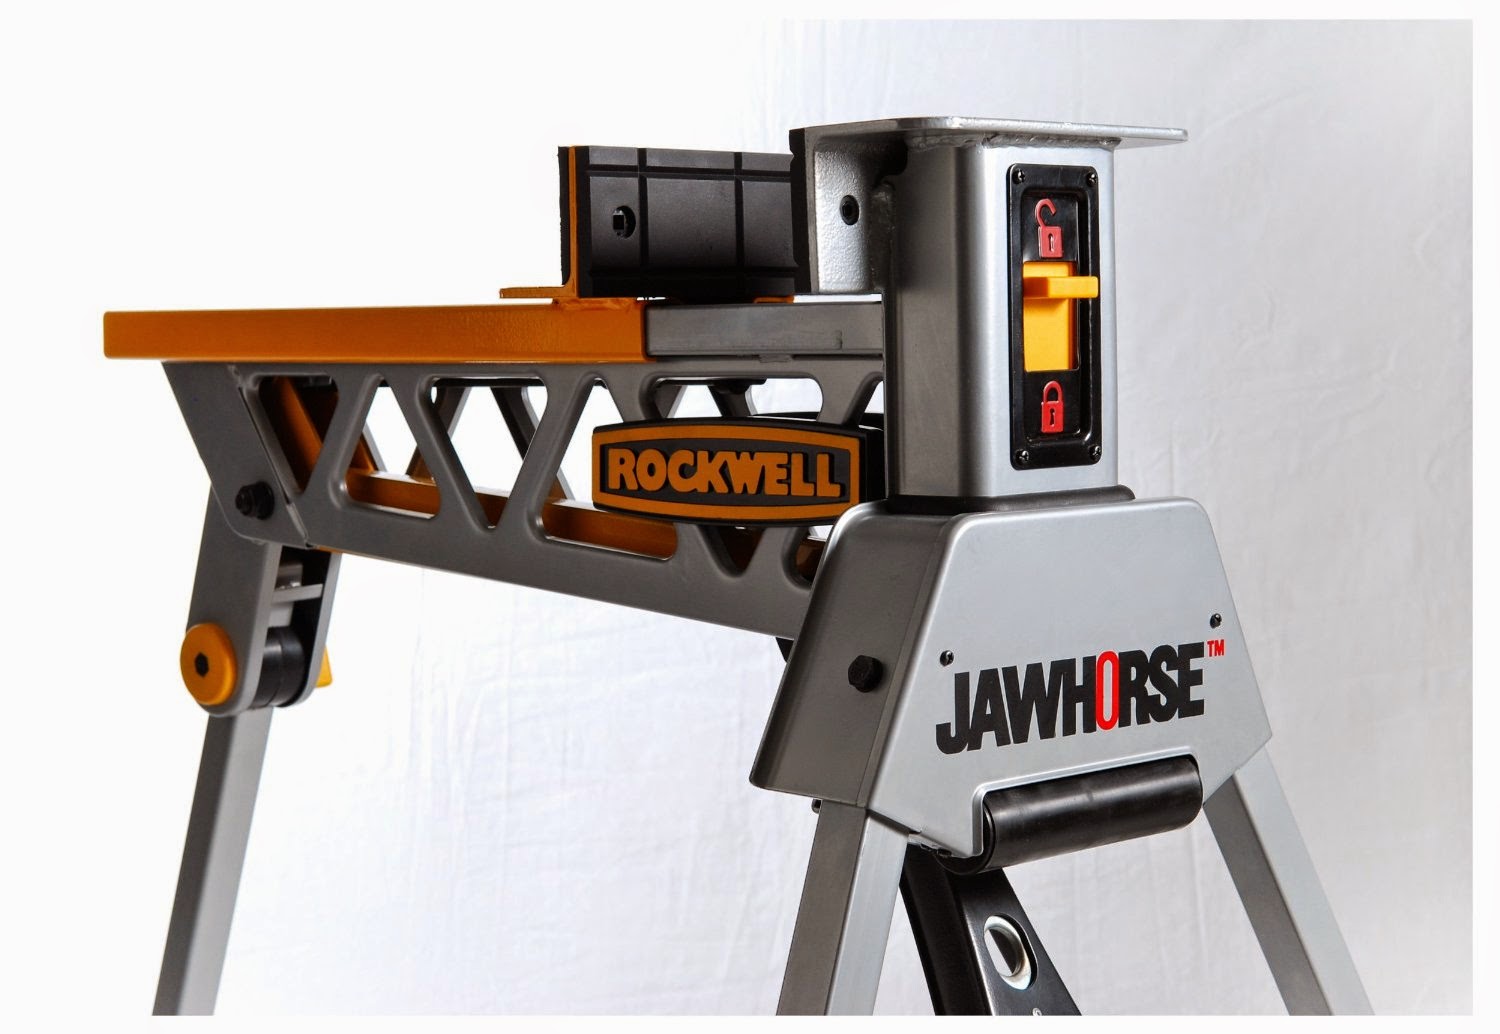  Rockwell Jawhorse RK9102 Saddle Bag Accessory Attachment 